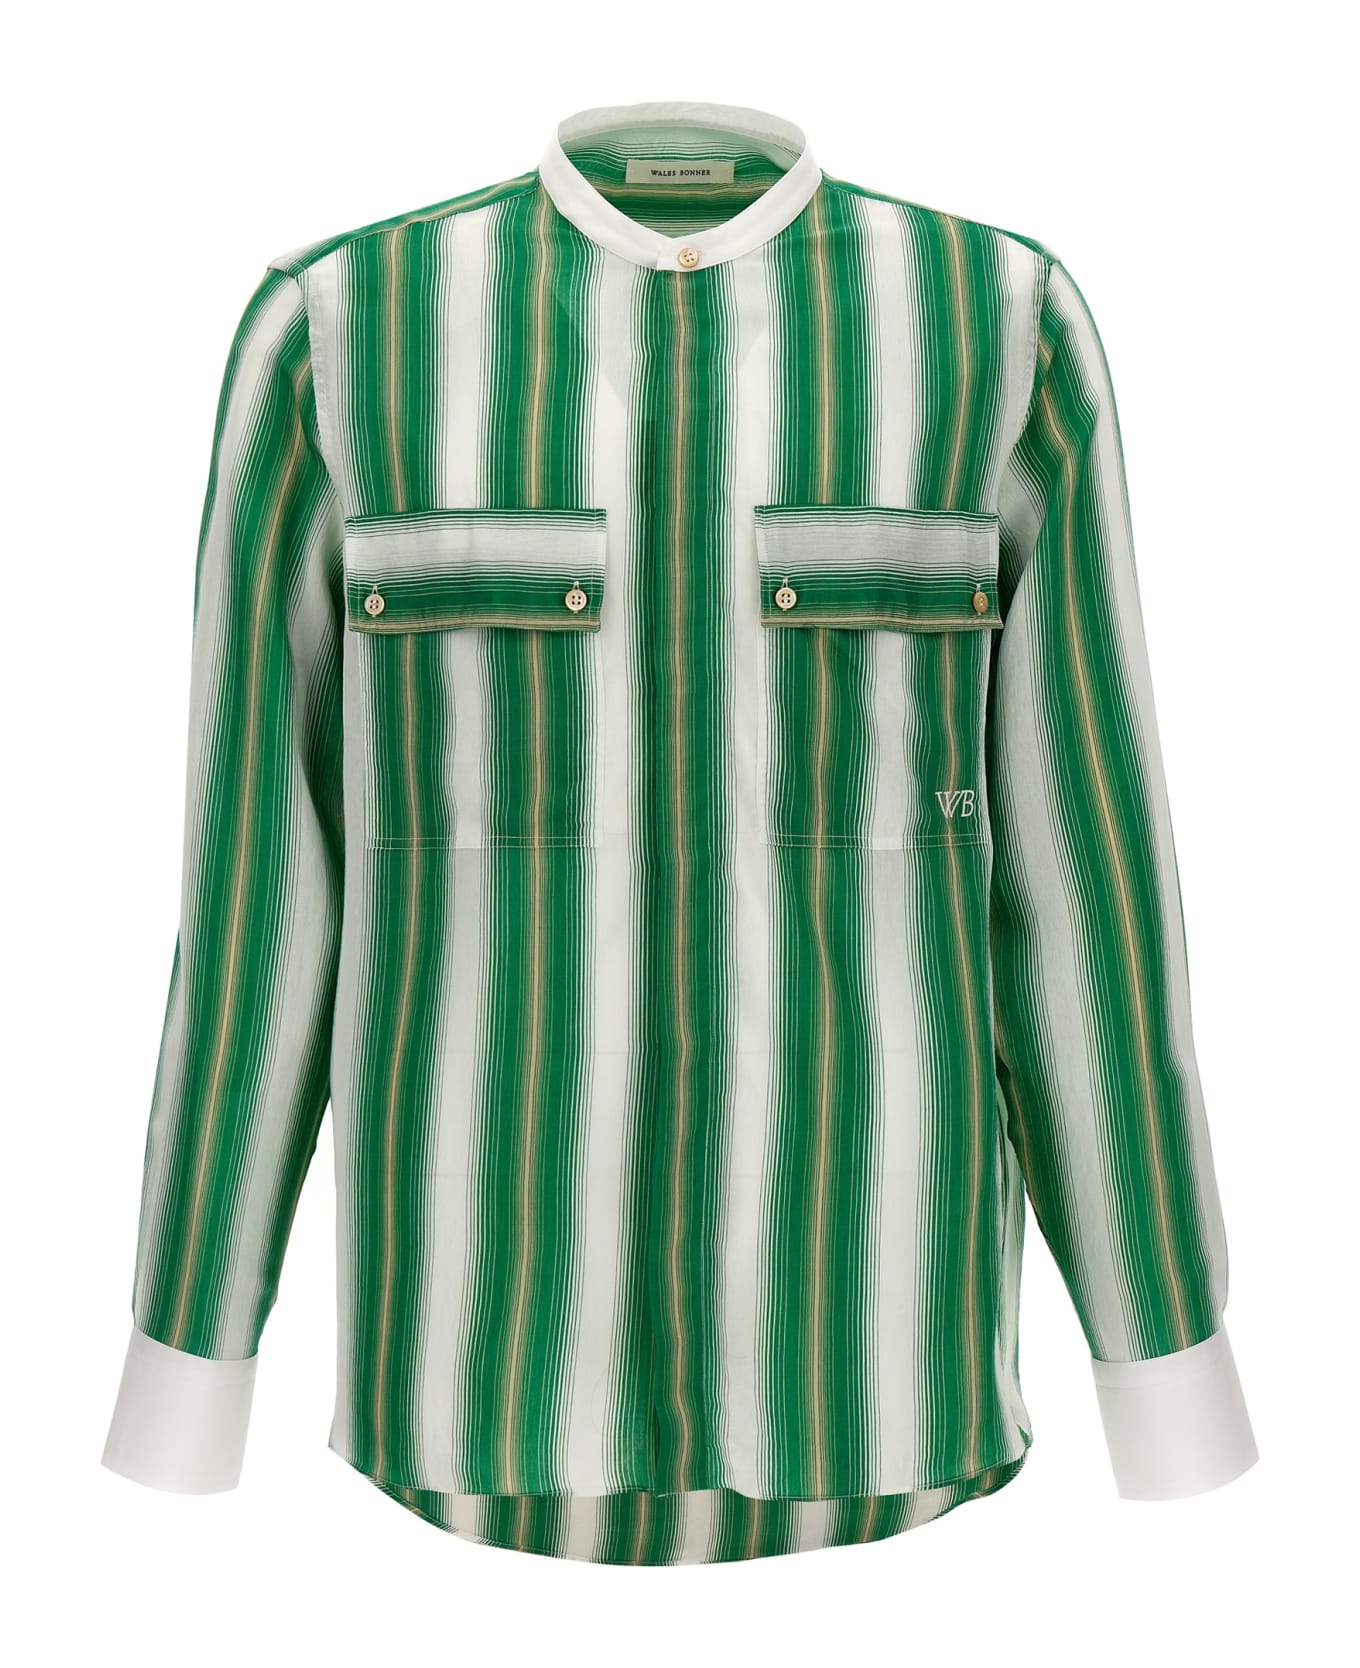 Wales Bonner 'cadence' Shirt - 0070 GREEN AND IVORY